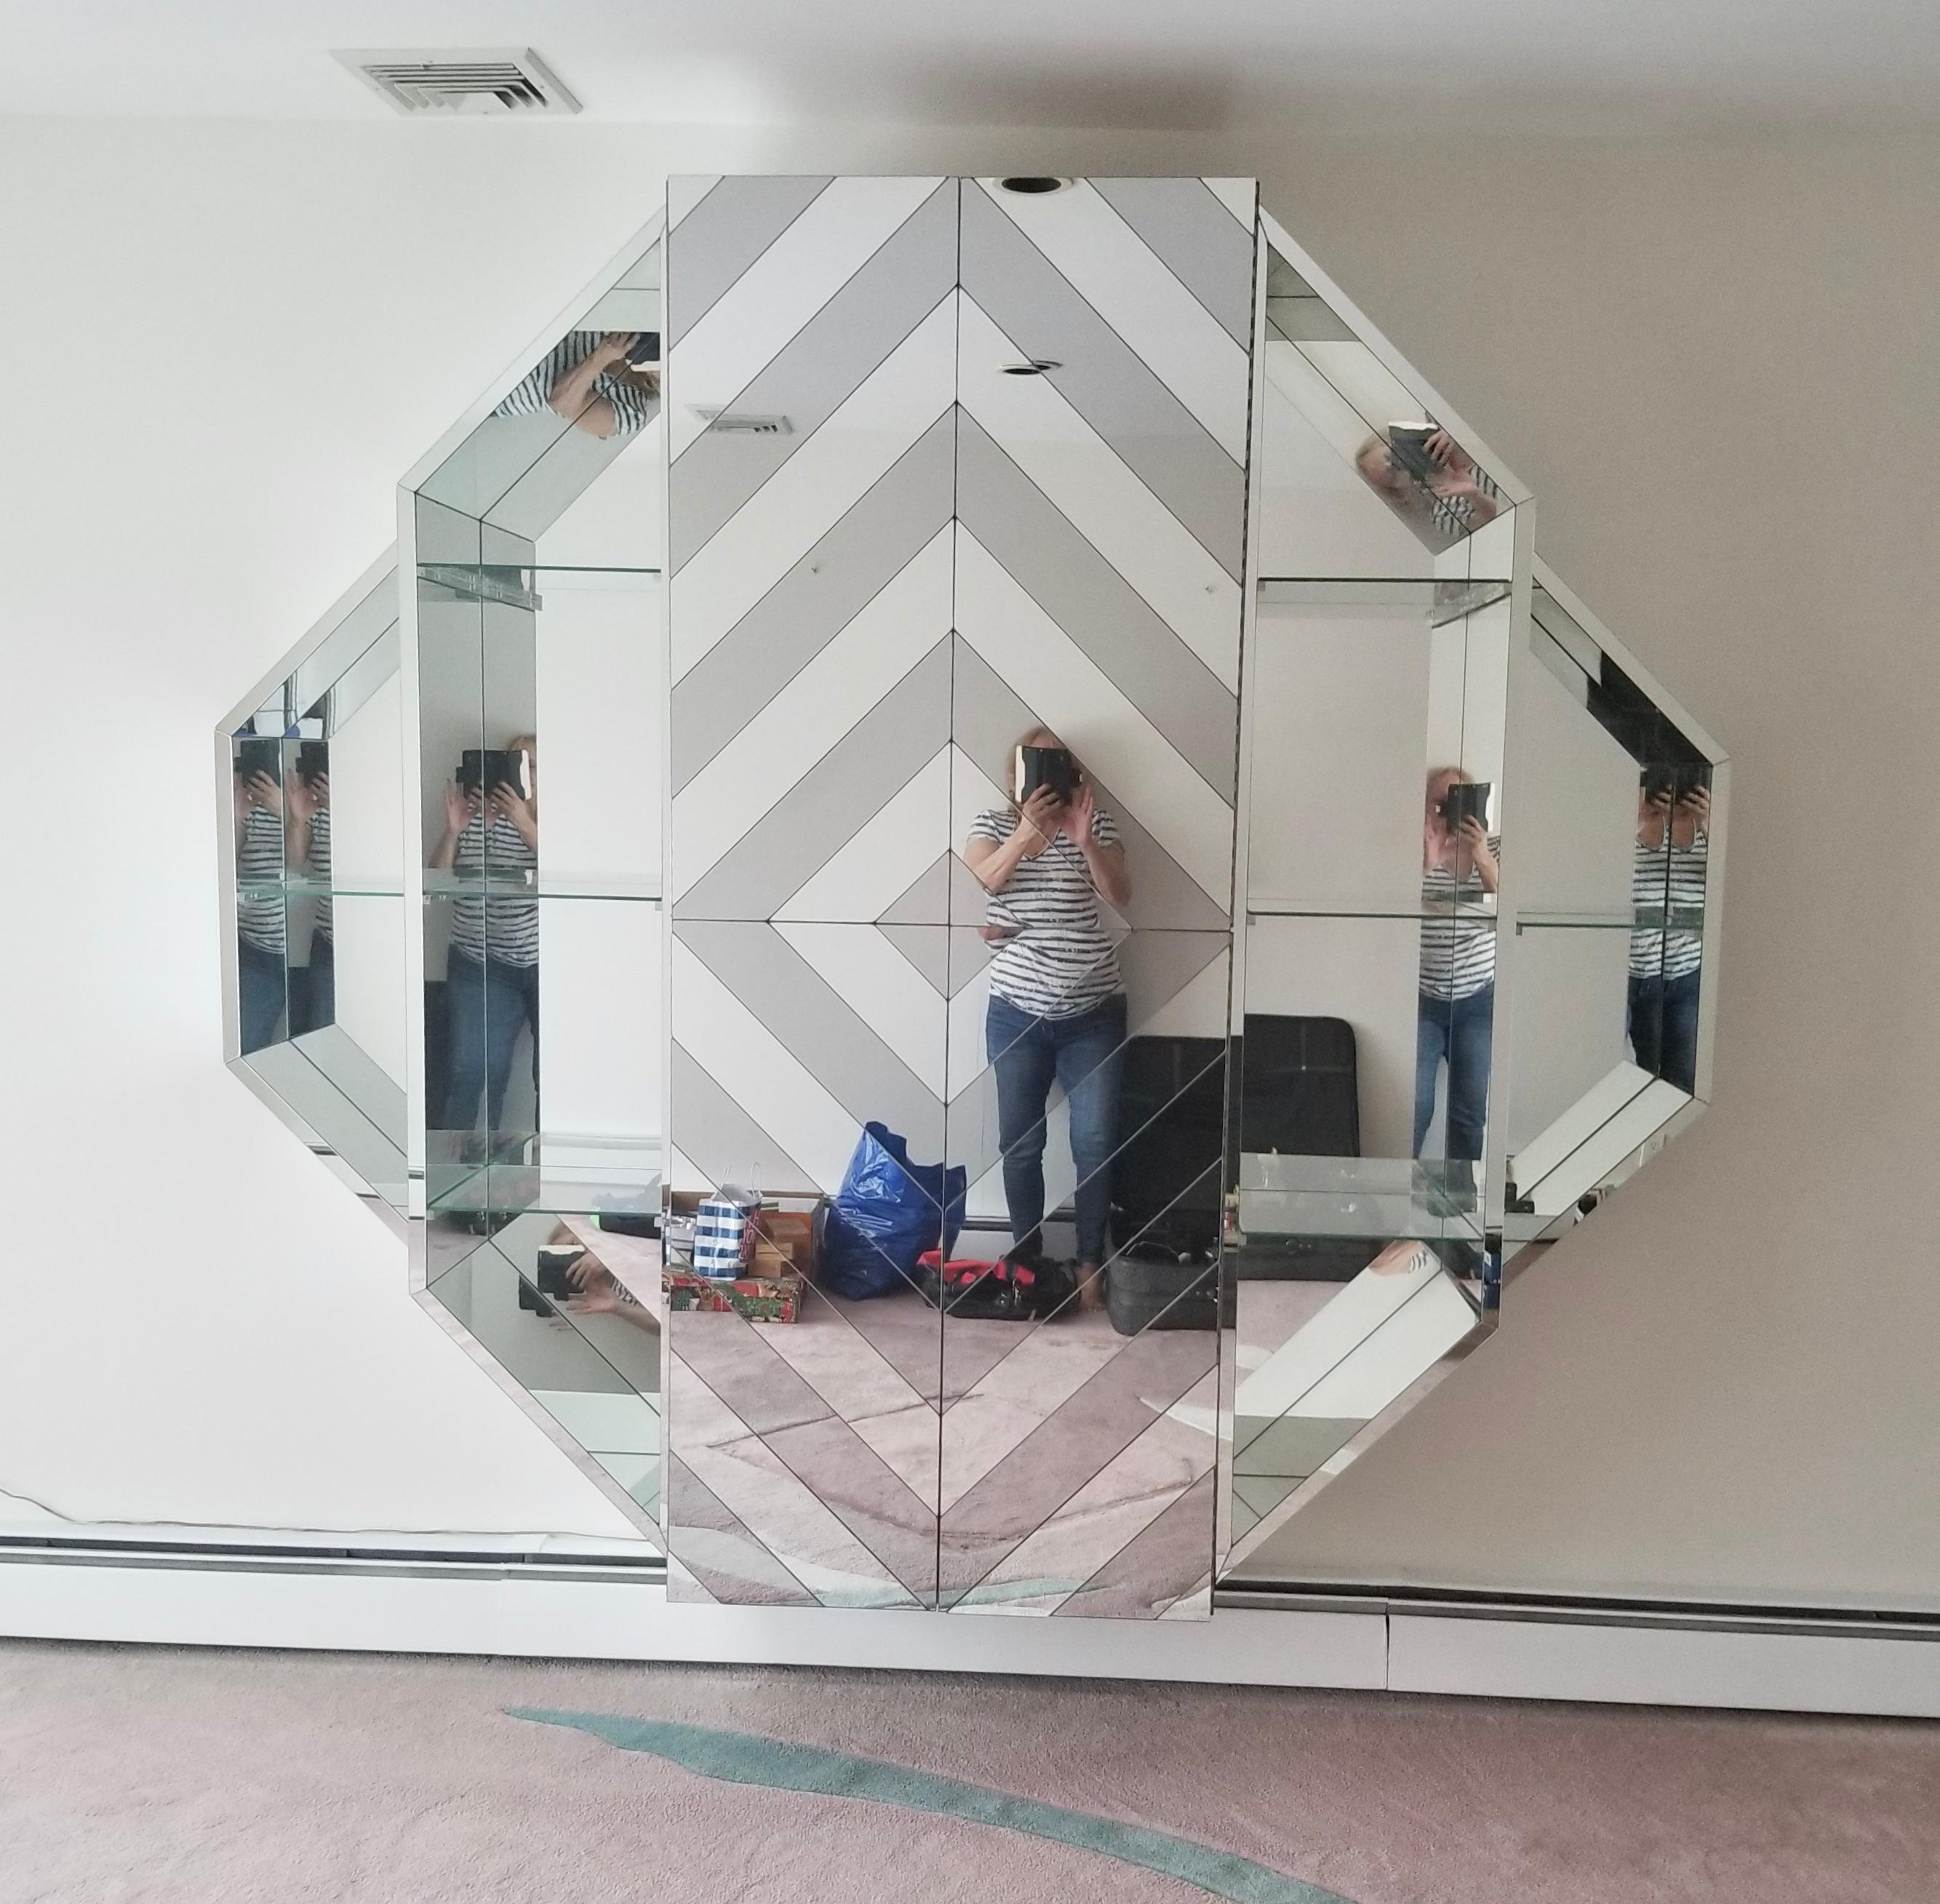 SATURDAY SALE

Custom made wall-mounted octagonal mirrored bar cabinet, circa 1980, USA.

Overall dimensions of this wall unit are 72 inches high by 84 inches wide by 18 inches deep.
It mounts on the wall in five vertical sections with French